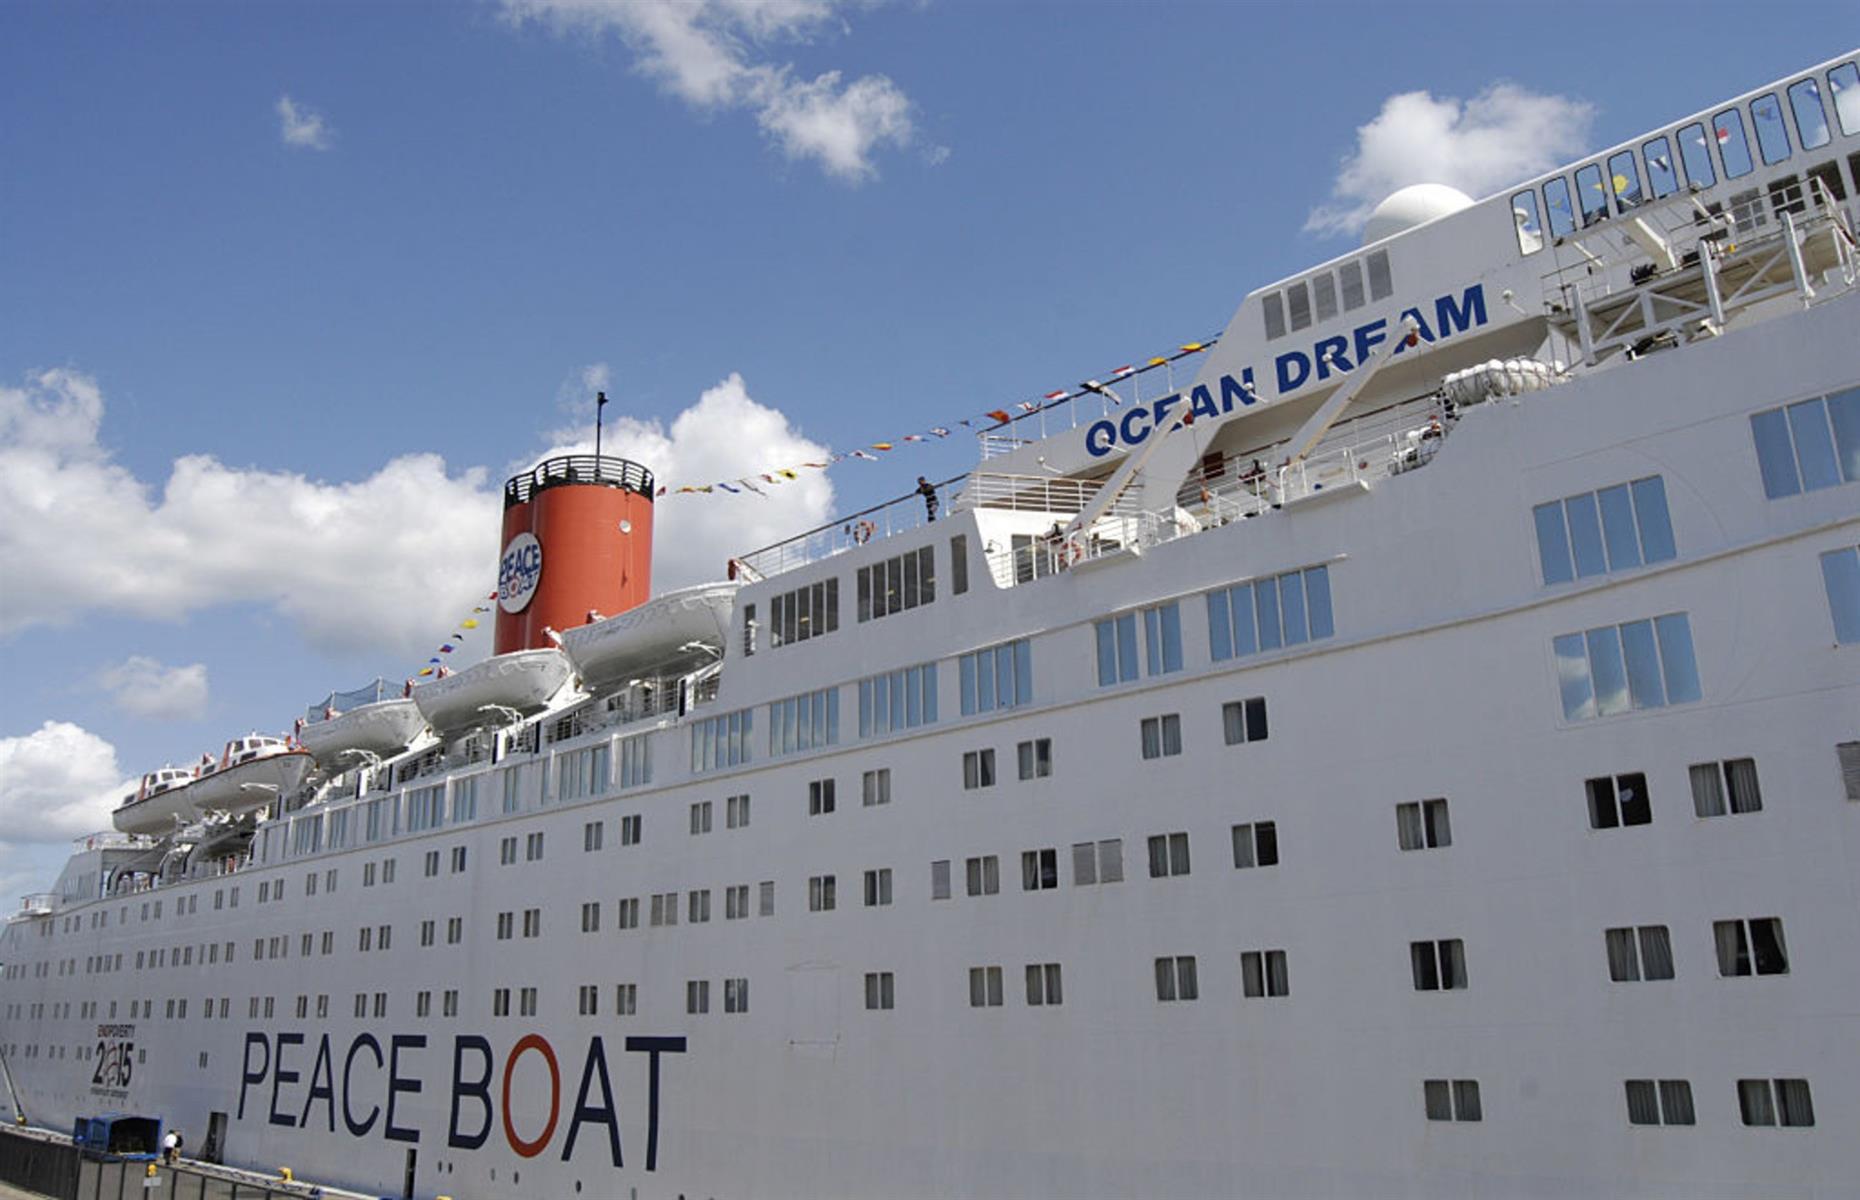 <p>There were also dalliances with P&O Australia and Pullmantur Cruises, before being transferred to Japanese-based Peace Boat in 2012 and used for their educational and sustainable voyages. The ship sailed as the Ocean Dream until 2020, before she was reported as scrapped in Alang, India in January 2021. </p>